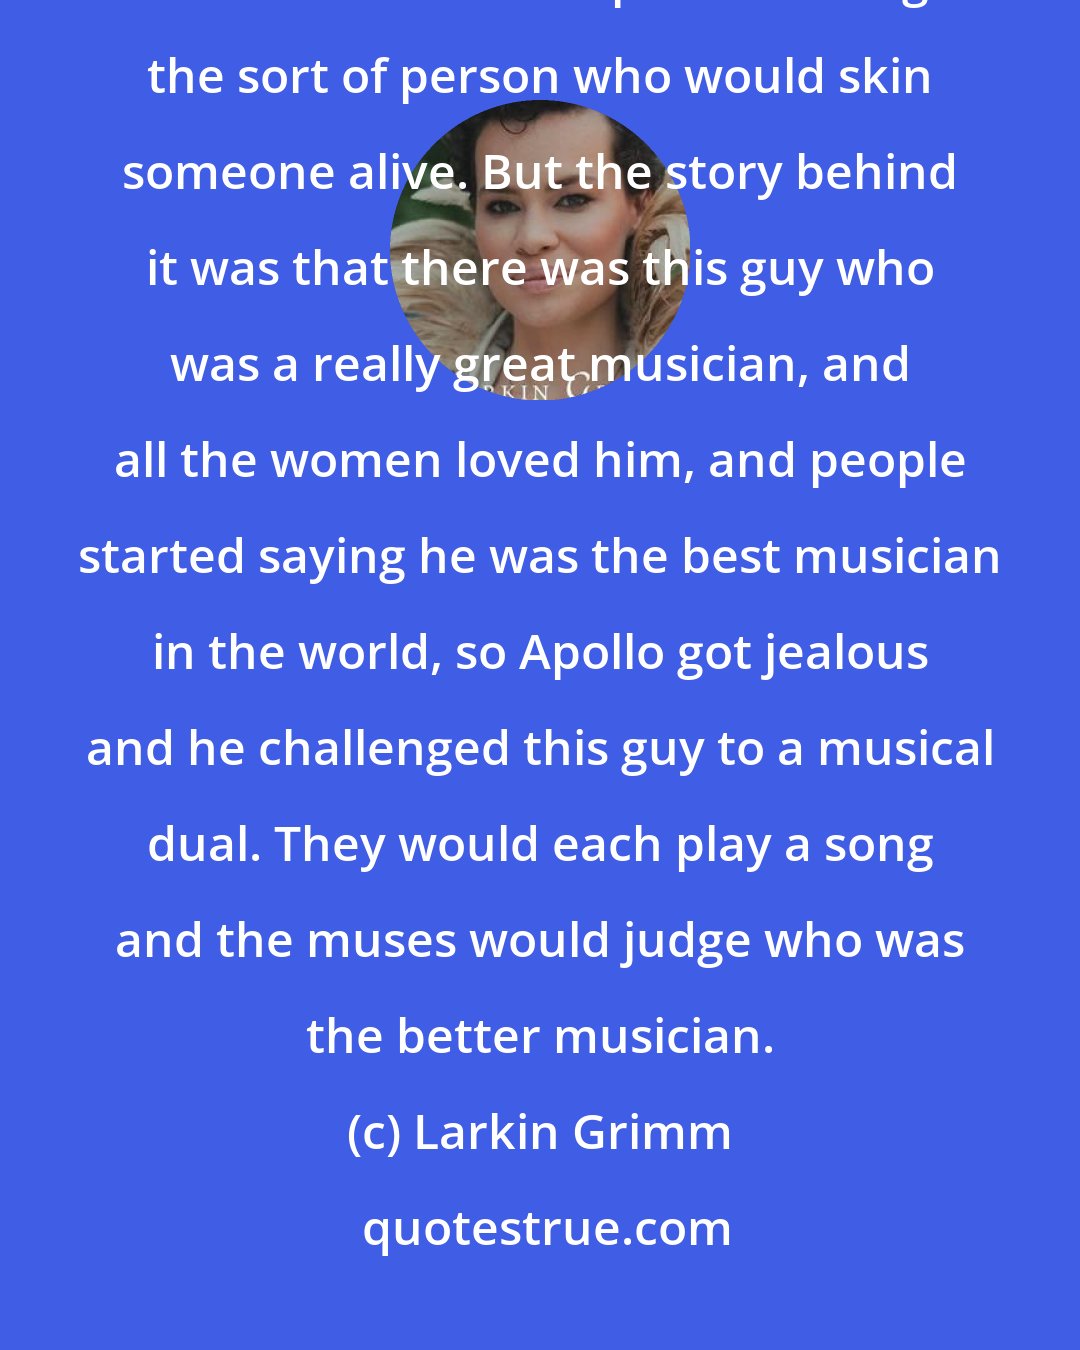 Larkin Grimm: So Nemerov showed us this picture, which is of Apollo flaying Marcius. You don't think of Apollo as being the sort of person who would skin someone alive. But the story behind it was that there was this guy who was a really great musician, and all the women loved him, and people started saying he was the best musician in the world, so Apollo got jealous and he challenged this guy to a musical dual. They would each play a song and the muses would judge who was the better musician.